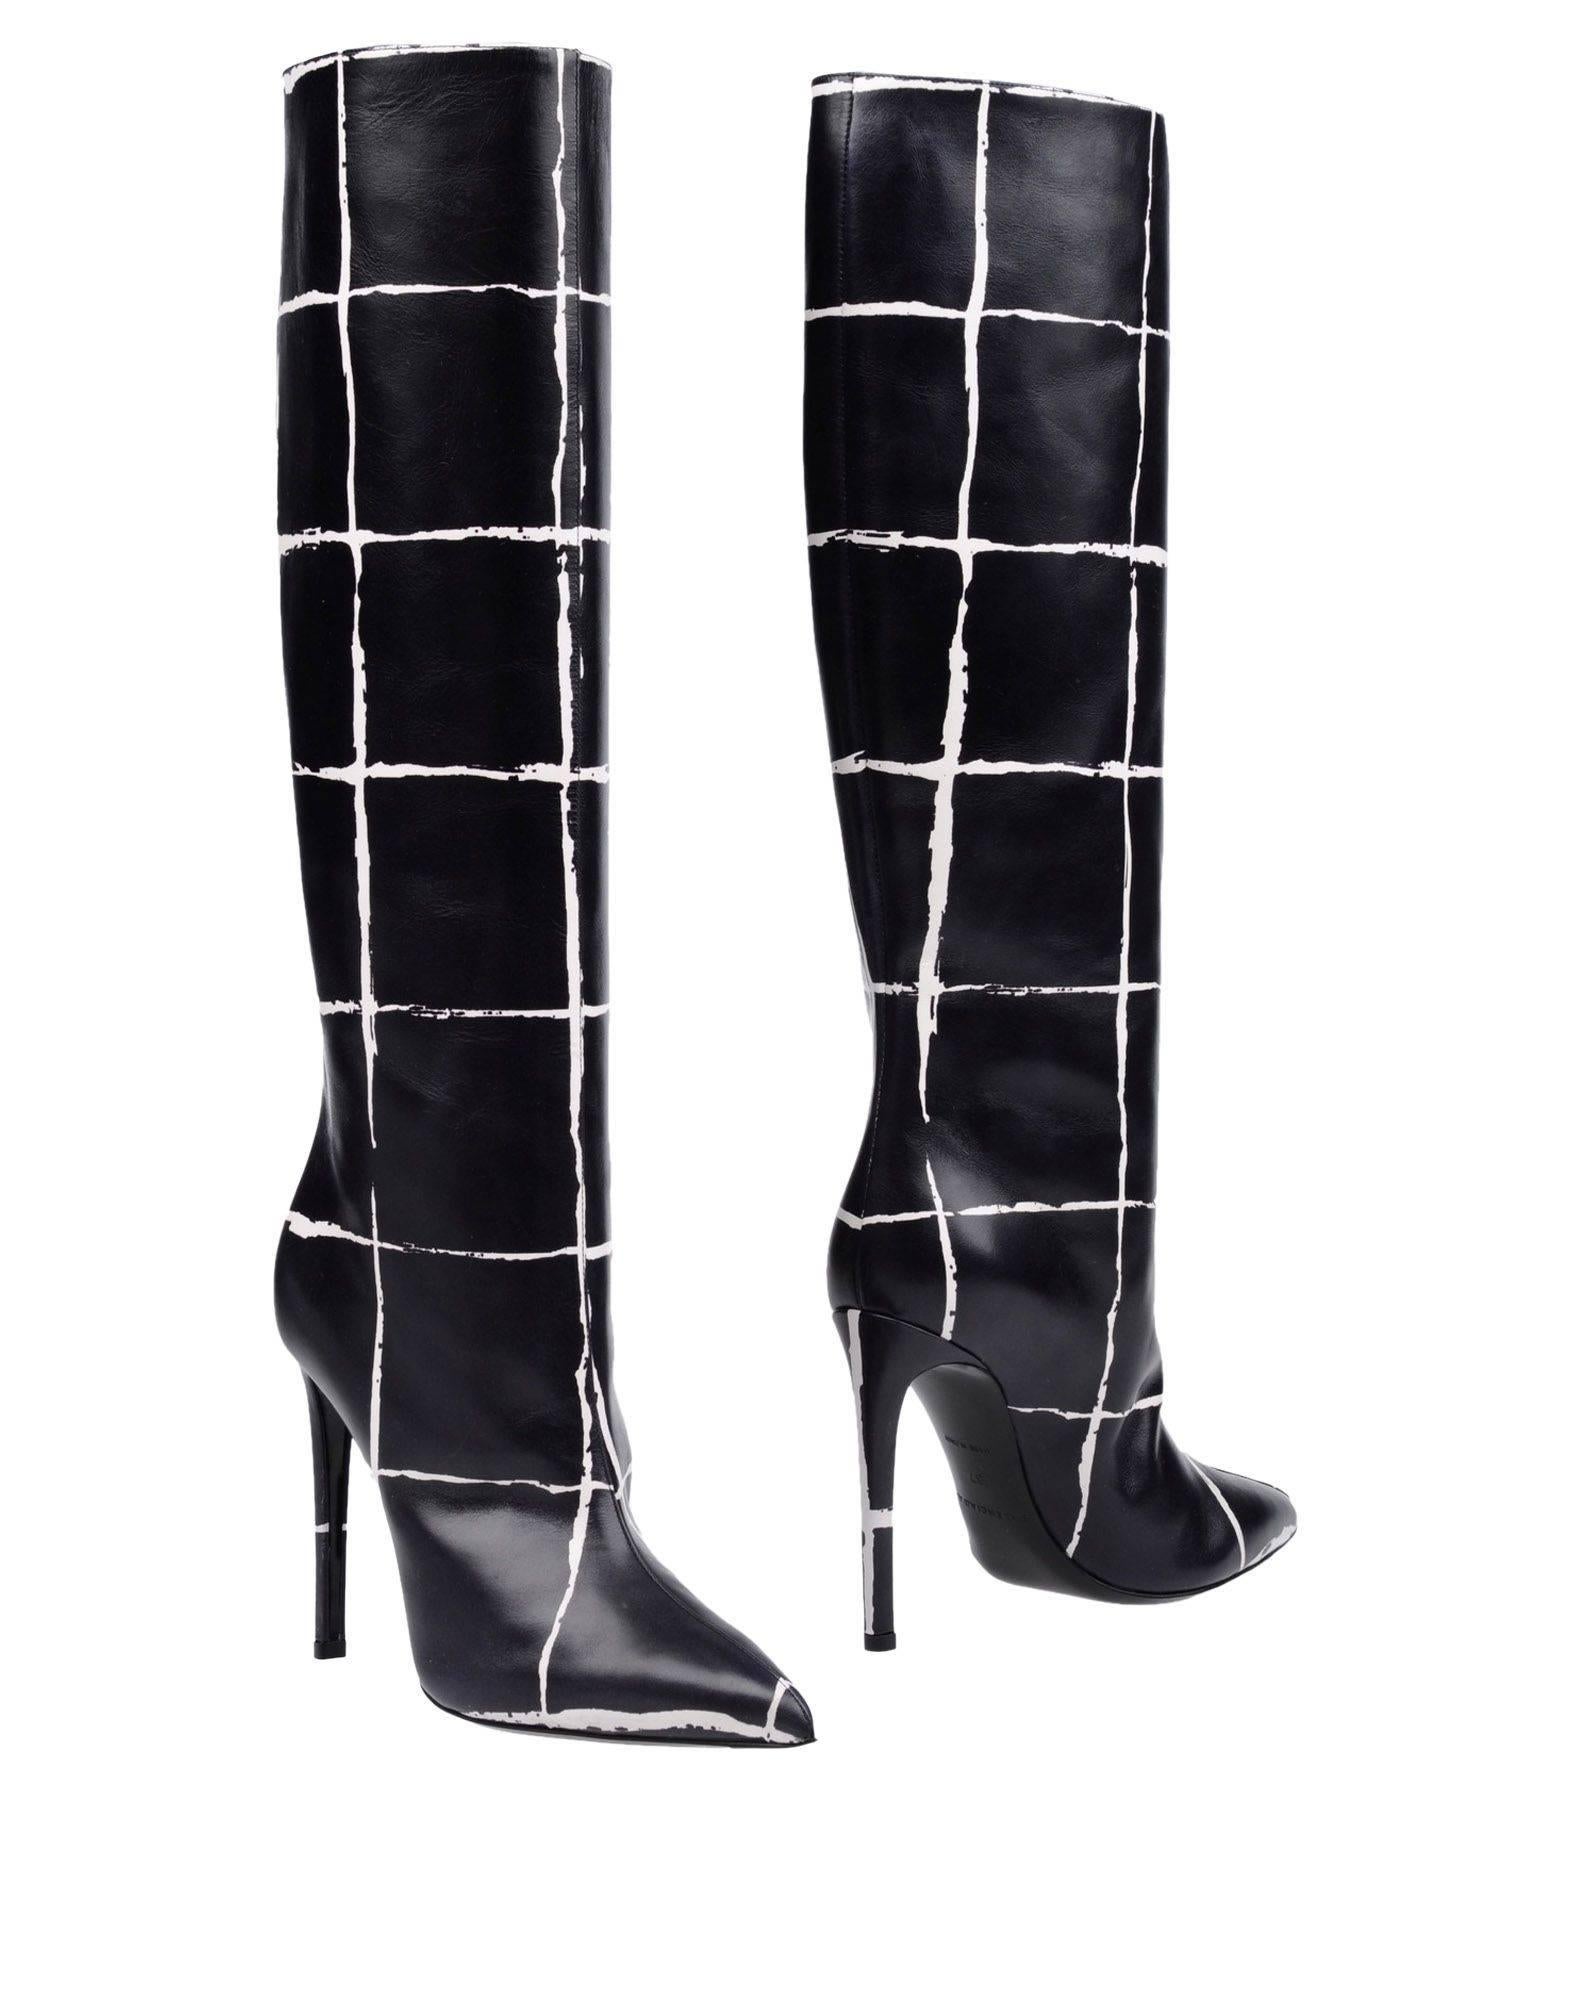 Balenciaga New Runway Black White Leather Knee High Boots in Box

Size IT 36 - Our only pair!
Leather
Slip on
Made in Italy
Heel height 4.5"
Includes original Balenciaga box

